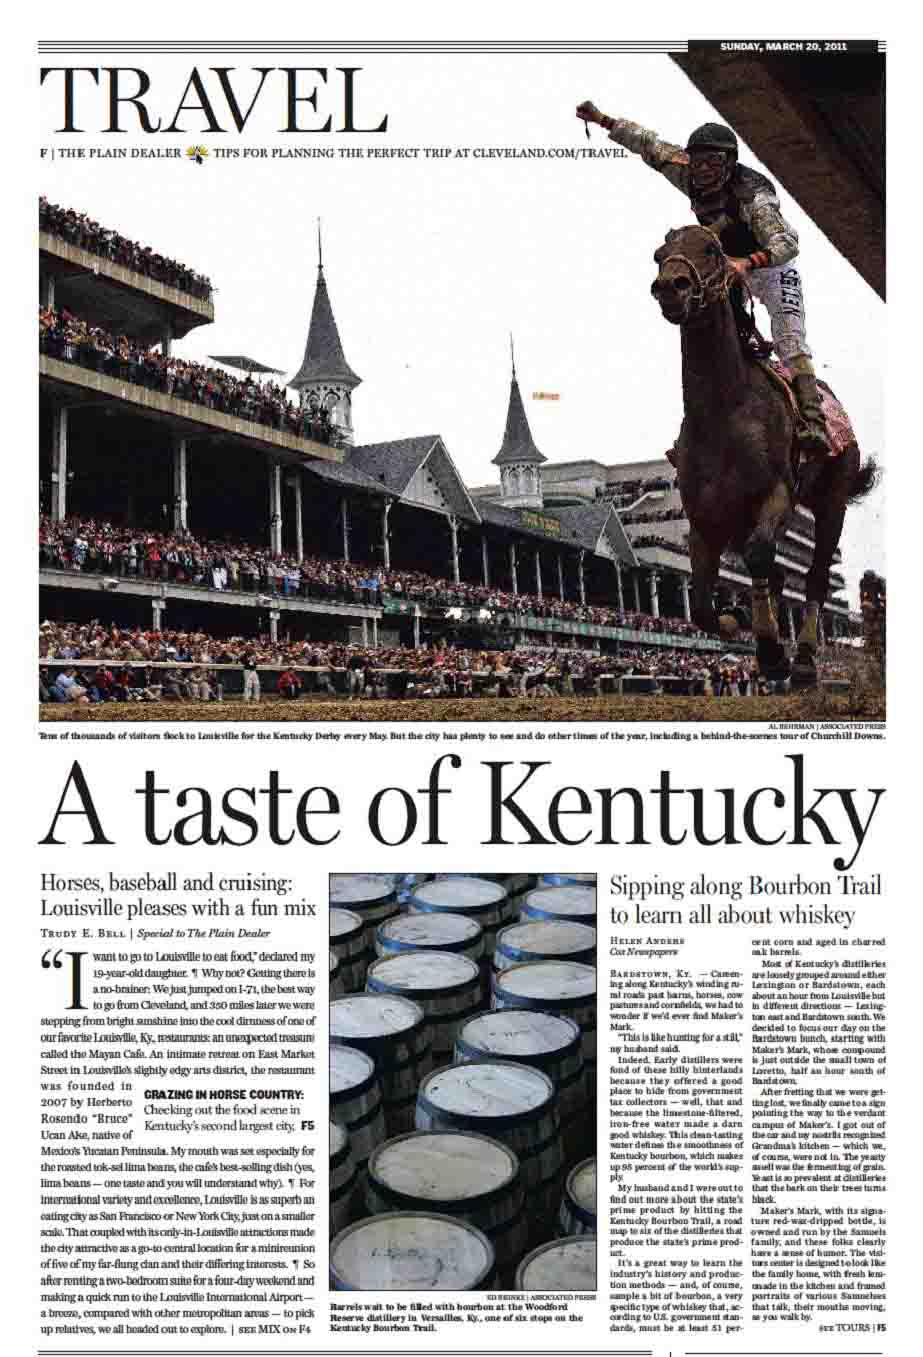 Sunday Travel cover feature on Louisville, The Plain Dealer, March 2011